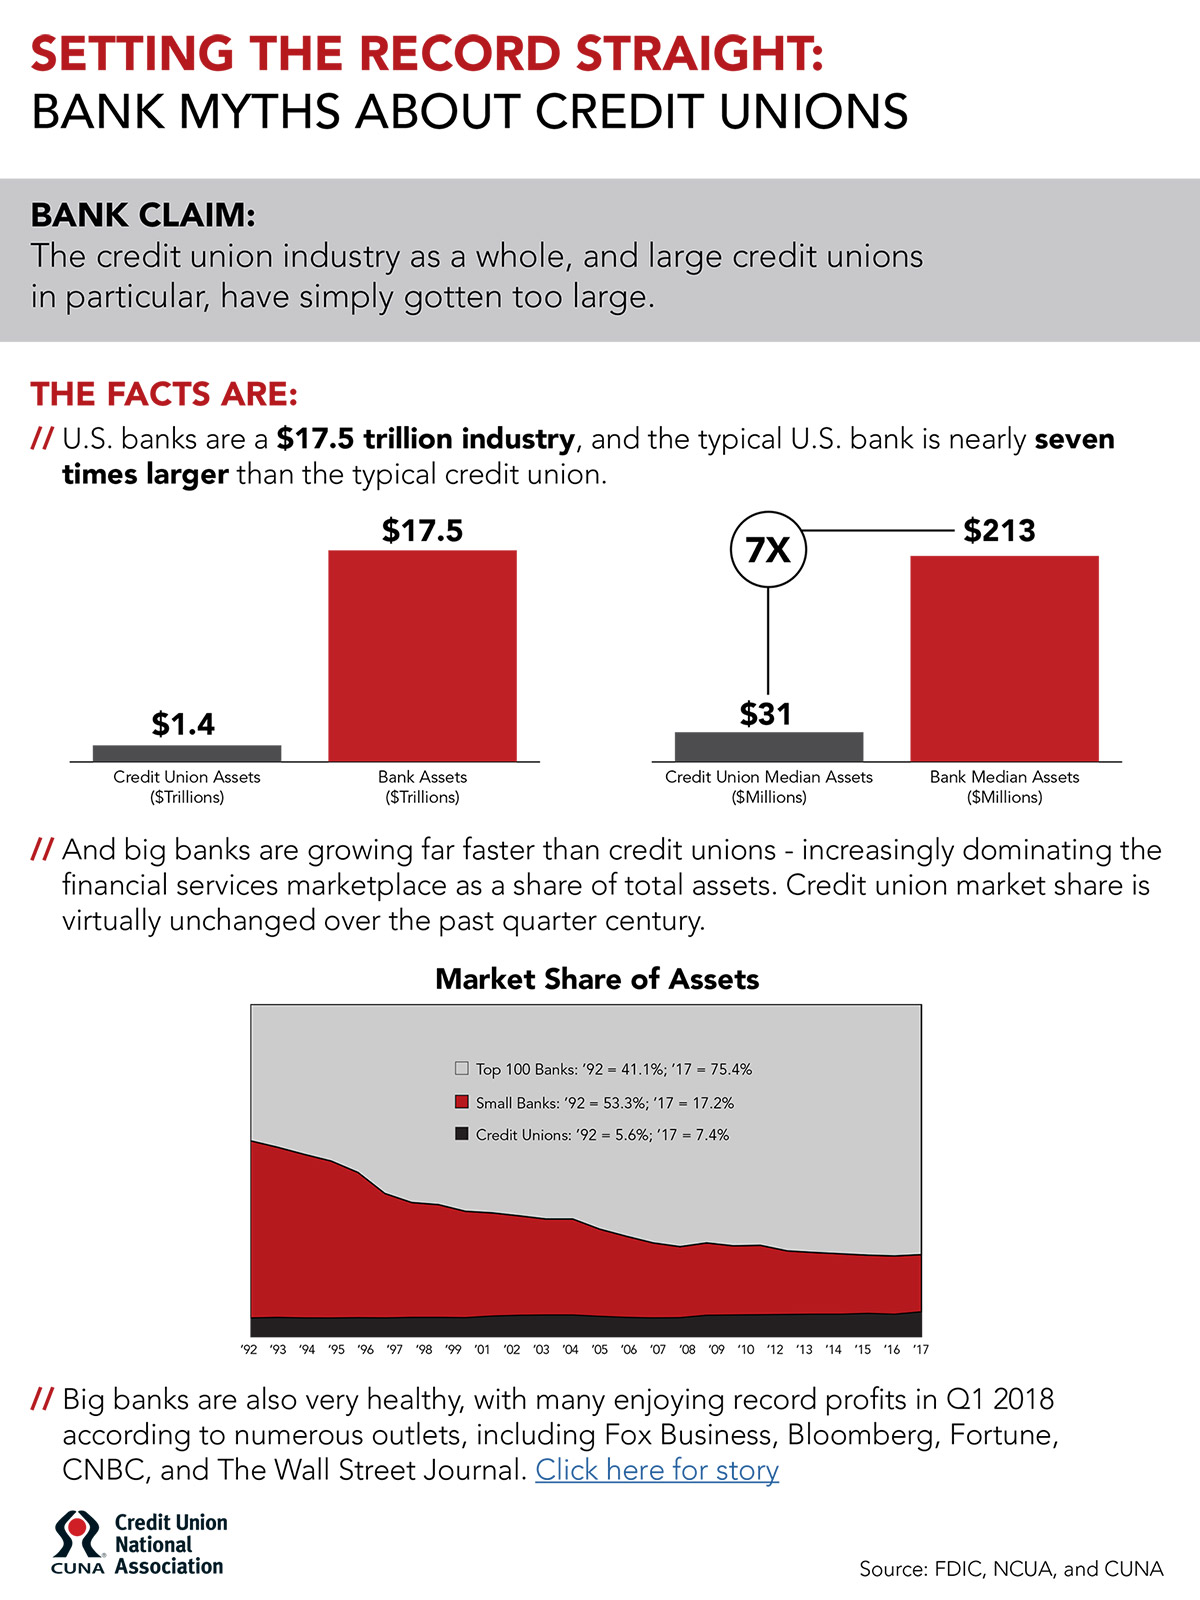 Bank Myths Infographic